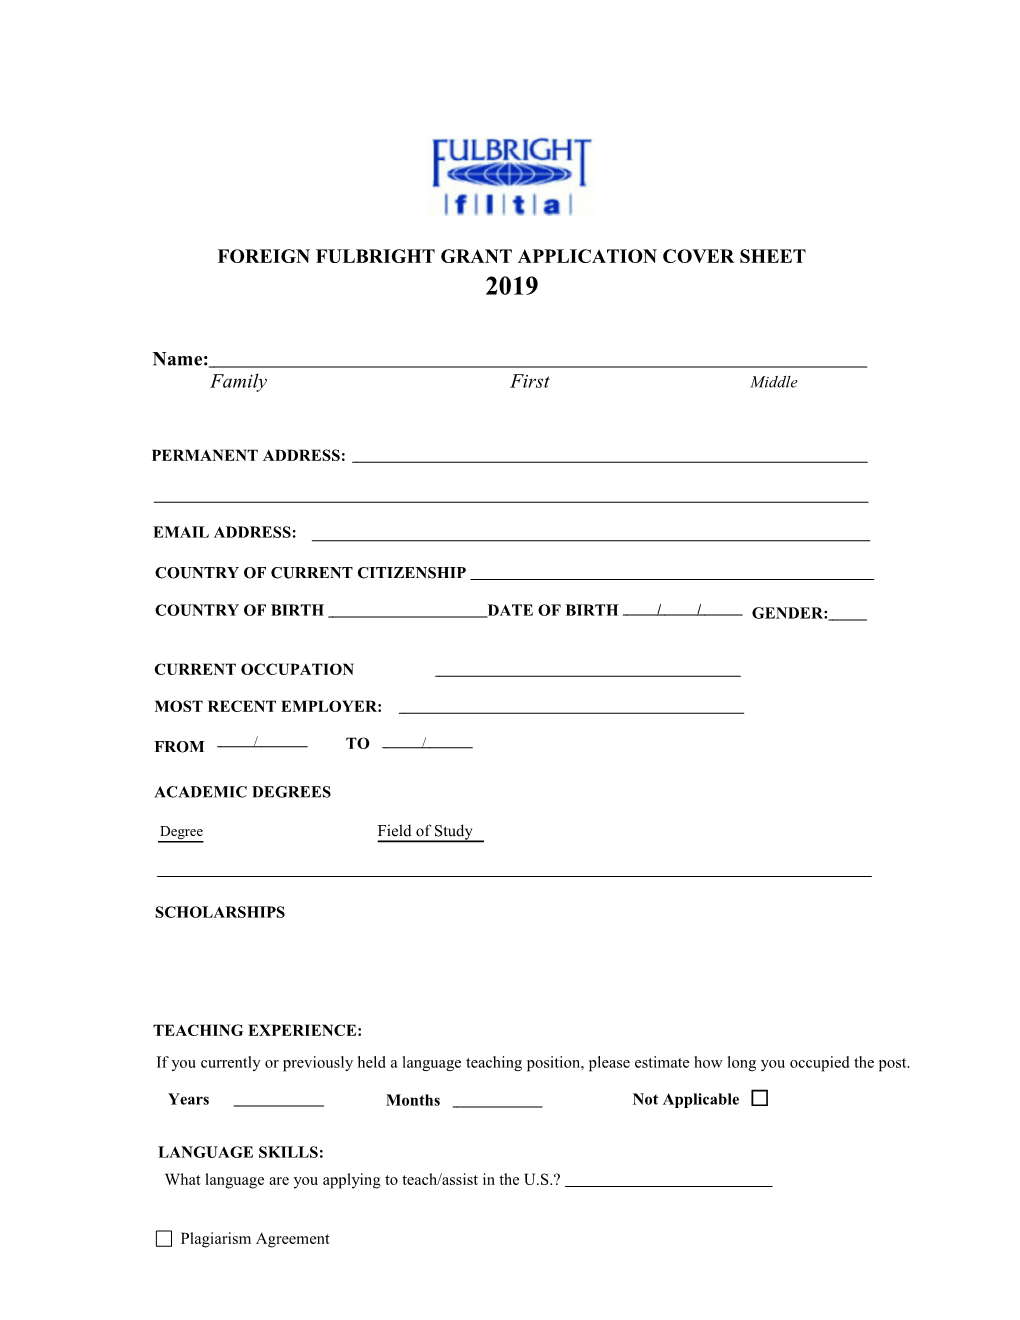 Foreign Fulbright Grant Application Cover Sheet